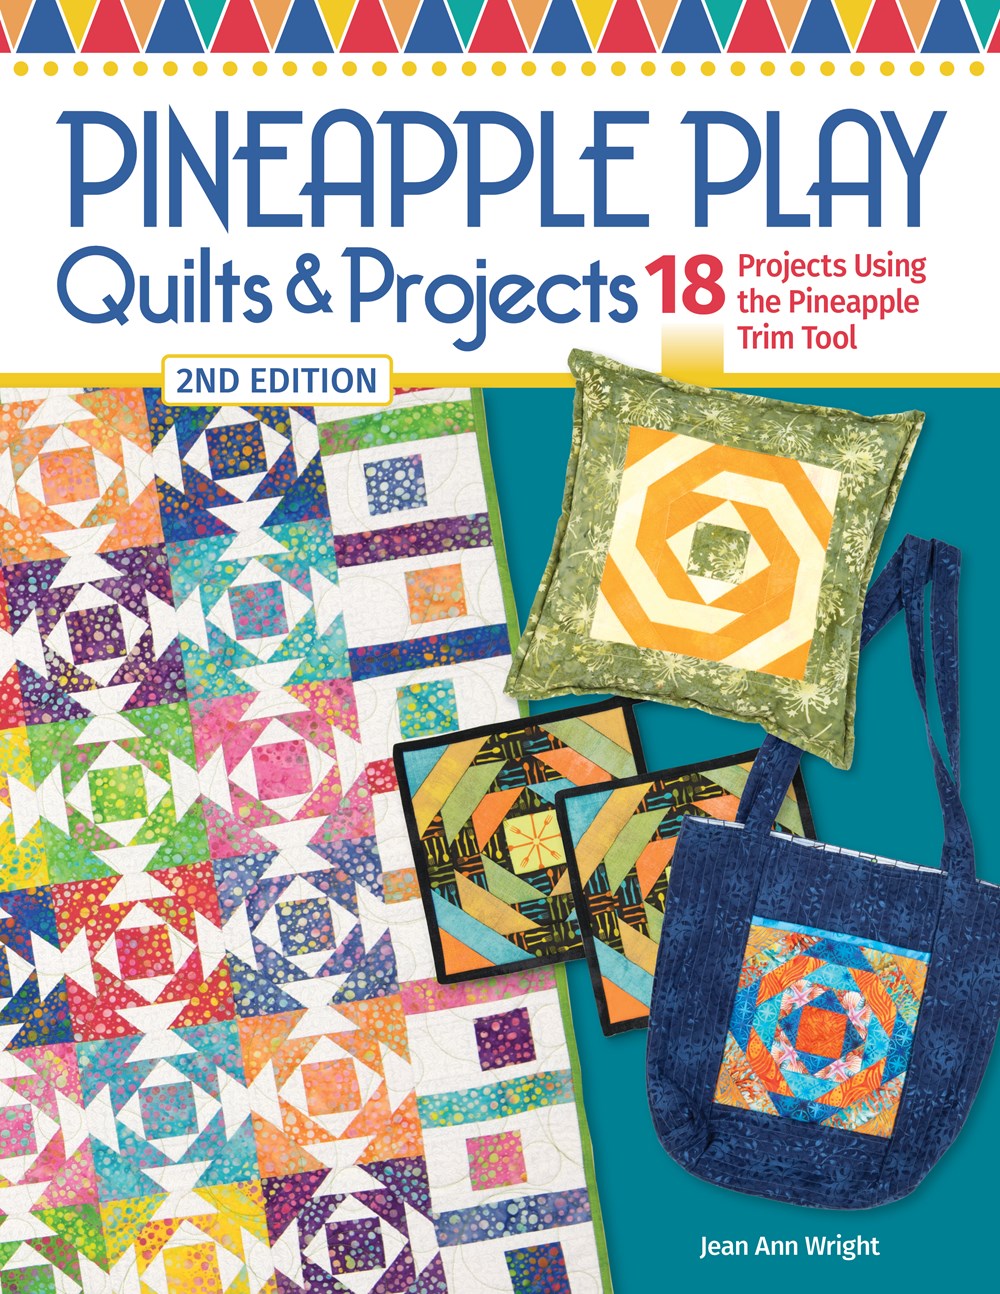 Pineapple Play Quilts & Projects: 18 Projects Using the Pineapple Trim Tool